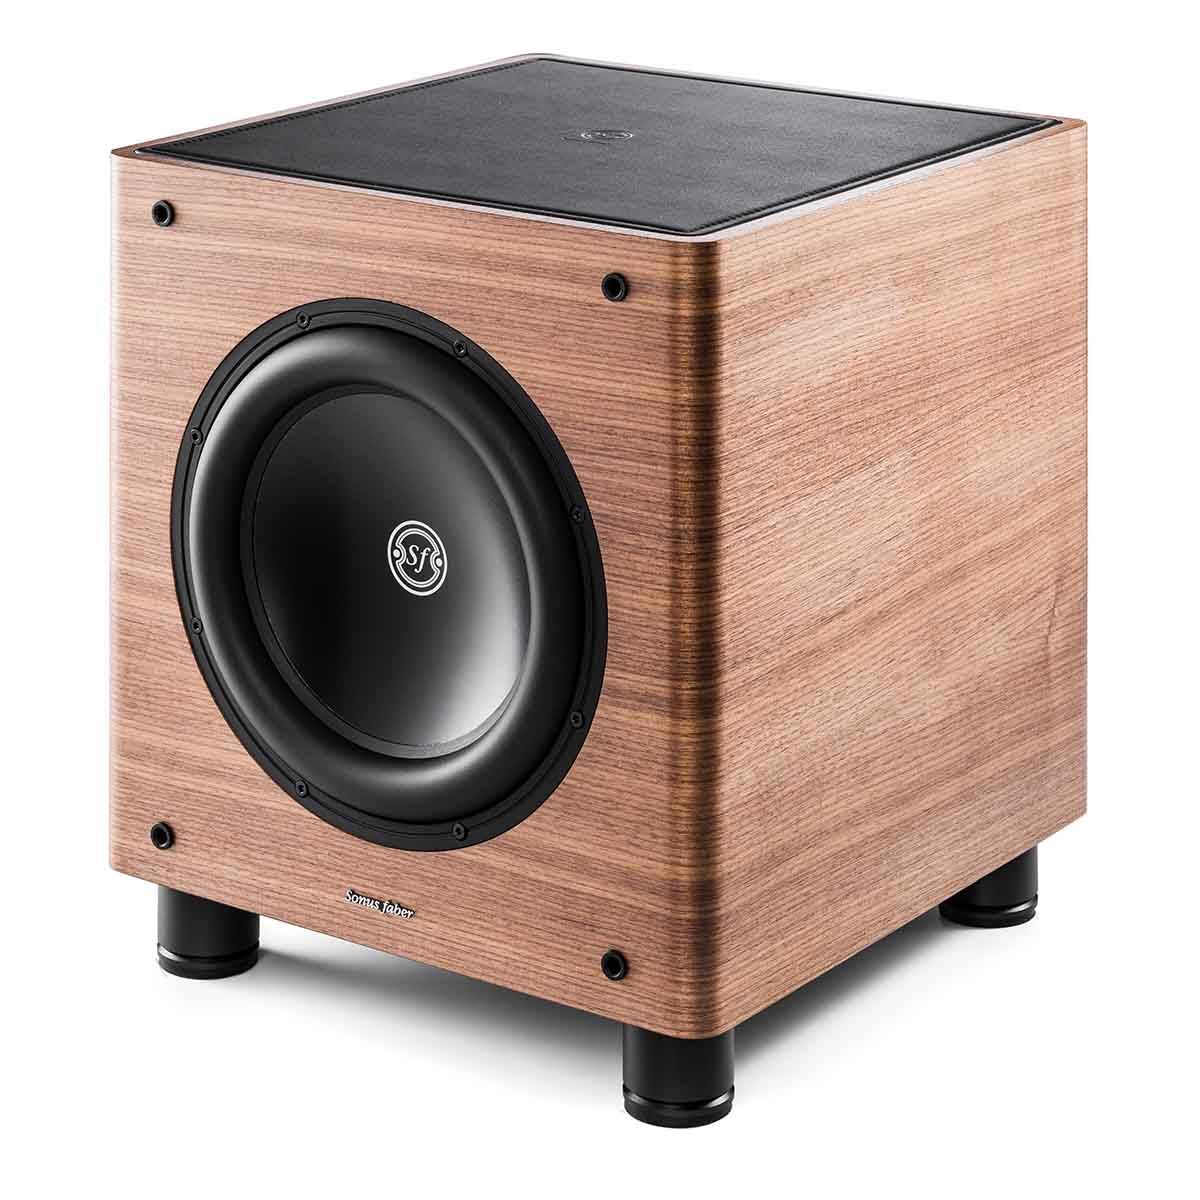 Sonus Faber Gravis II 10" Powered Subwoofer wood angled front view without grille